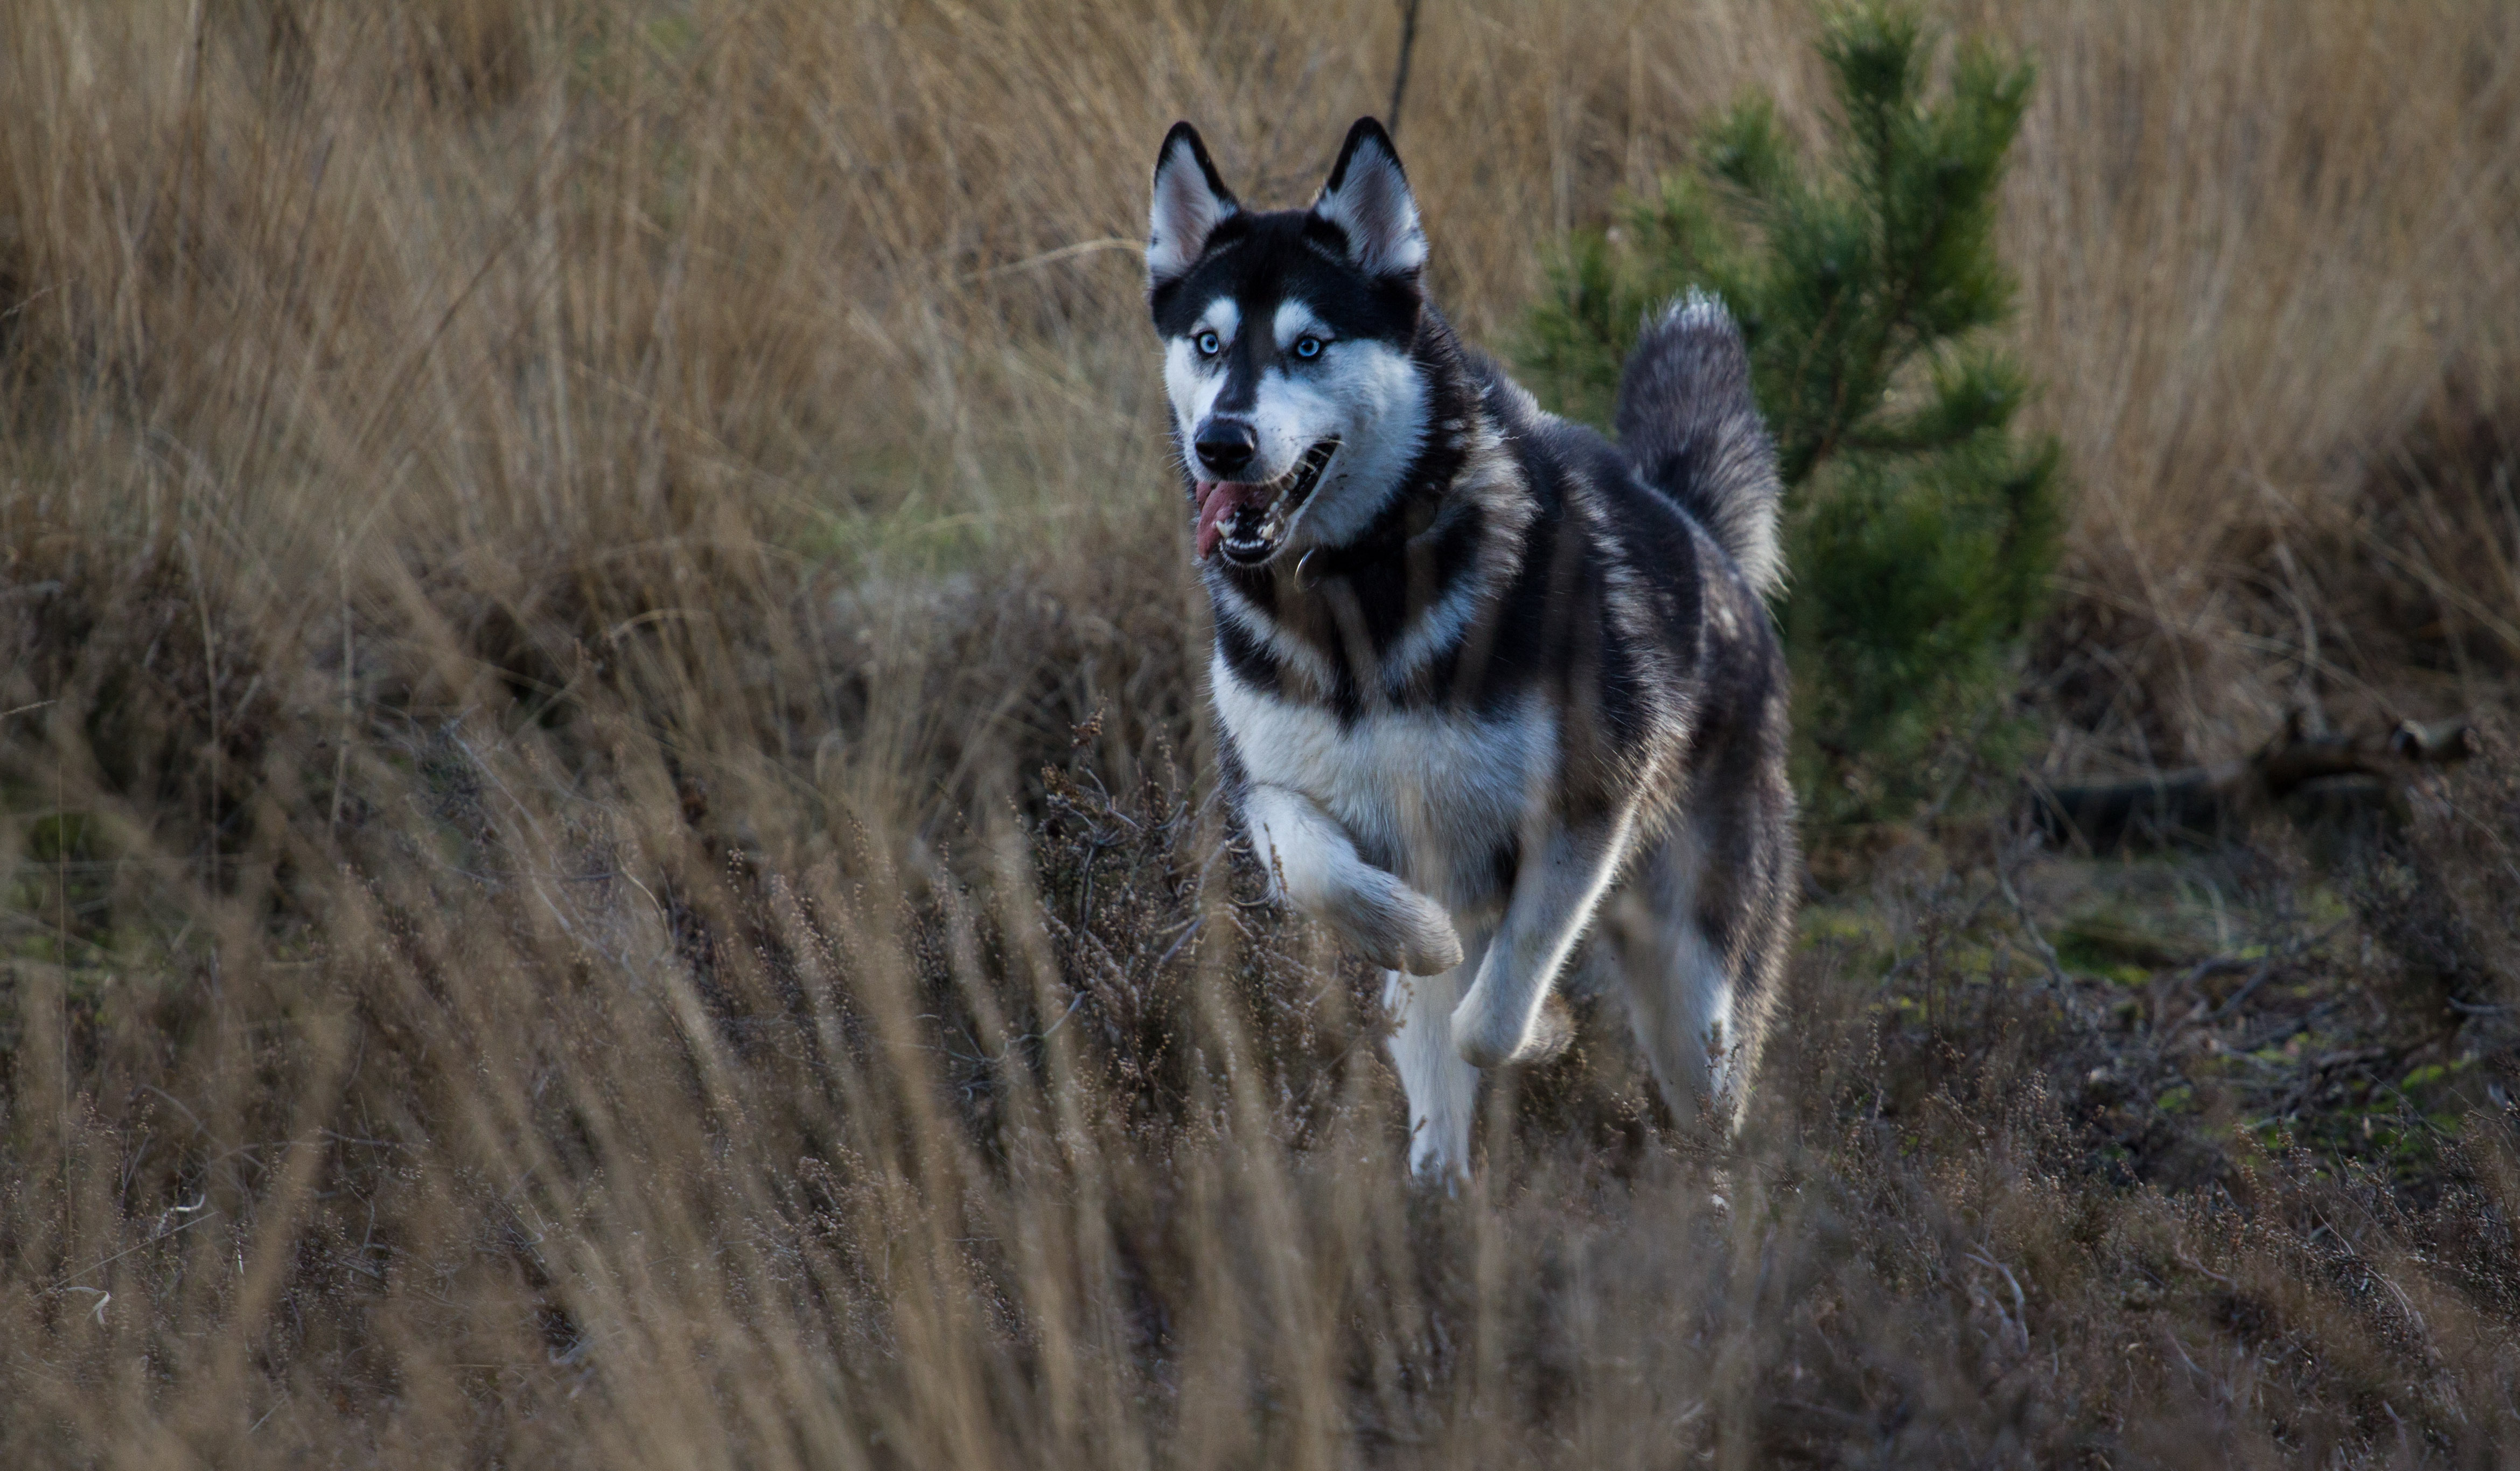 husky, animals, dog, protruding tongue, tongue stuck out, run, running for android